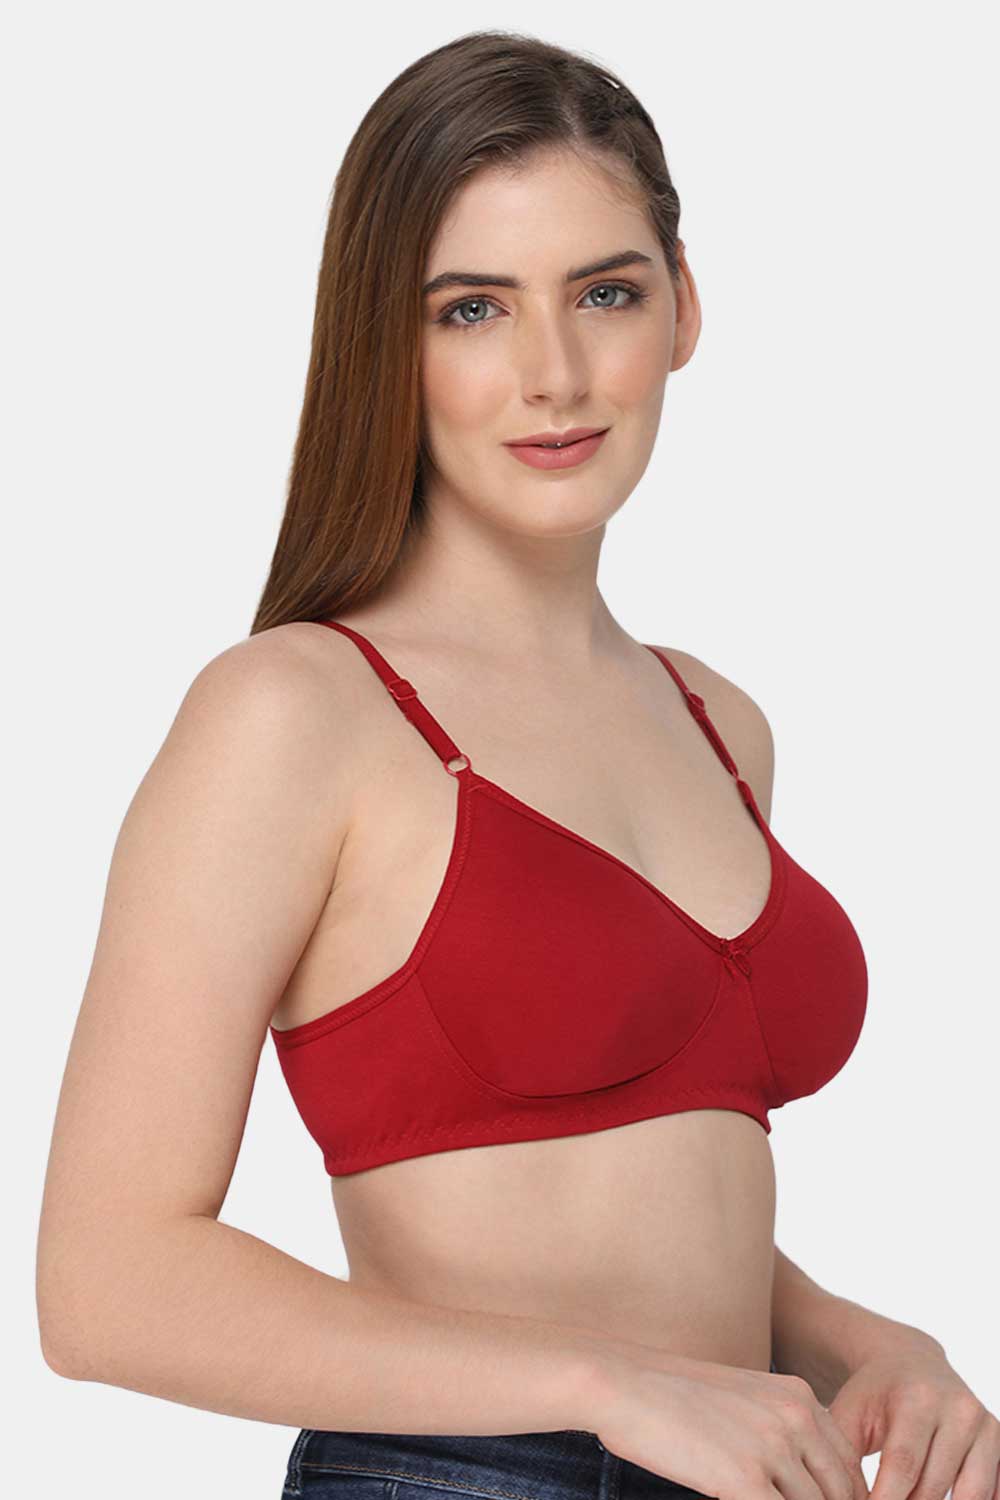 Intimacy Saree Bra - INT29 - Other Colors Size   30B Color BLUEATOLL